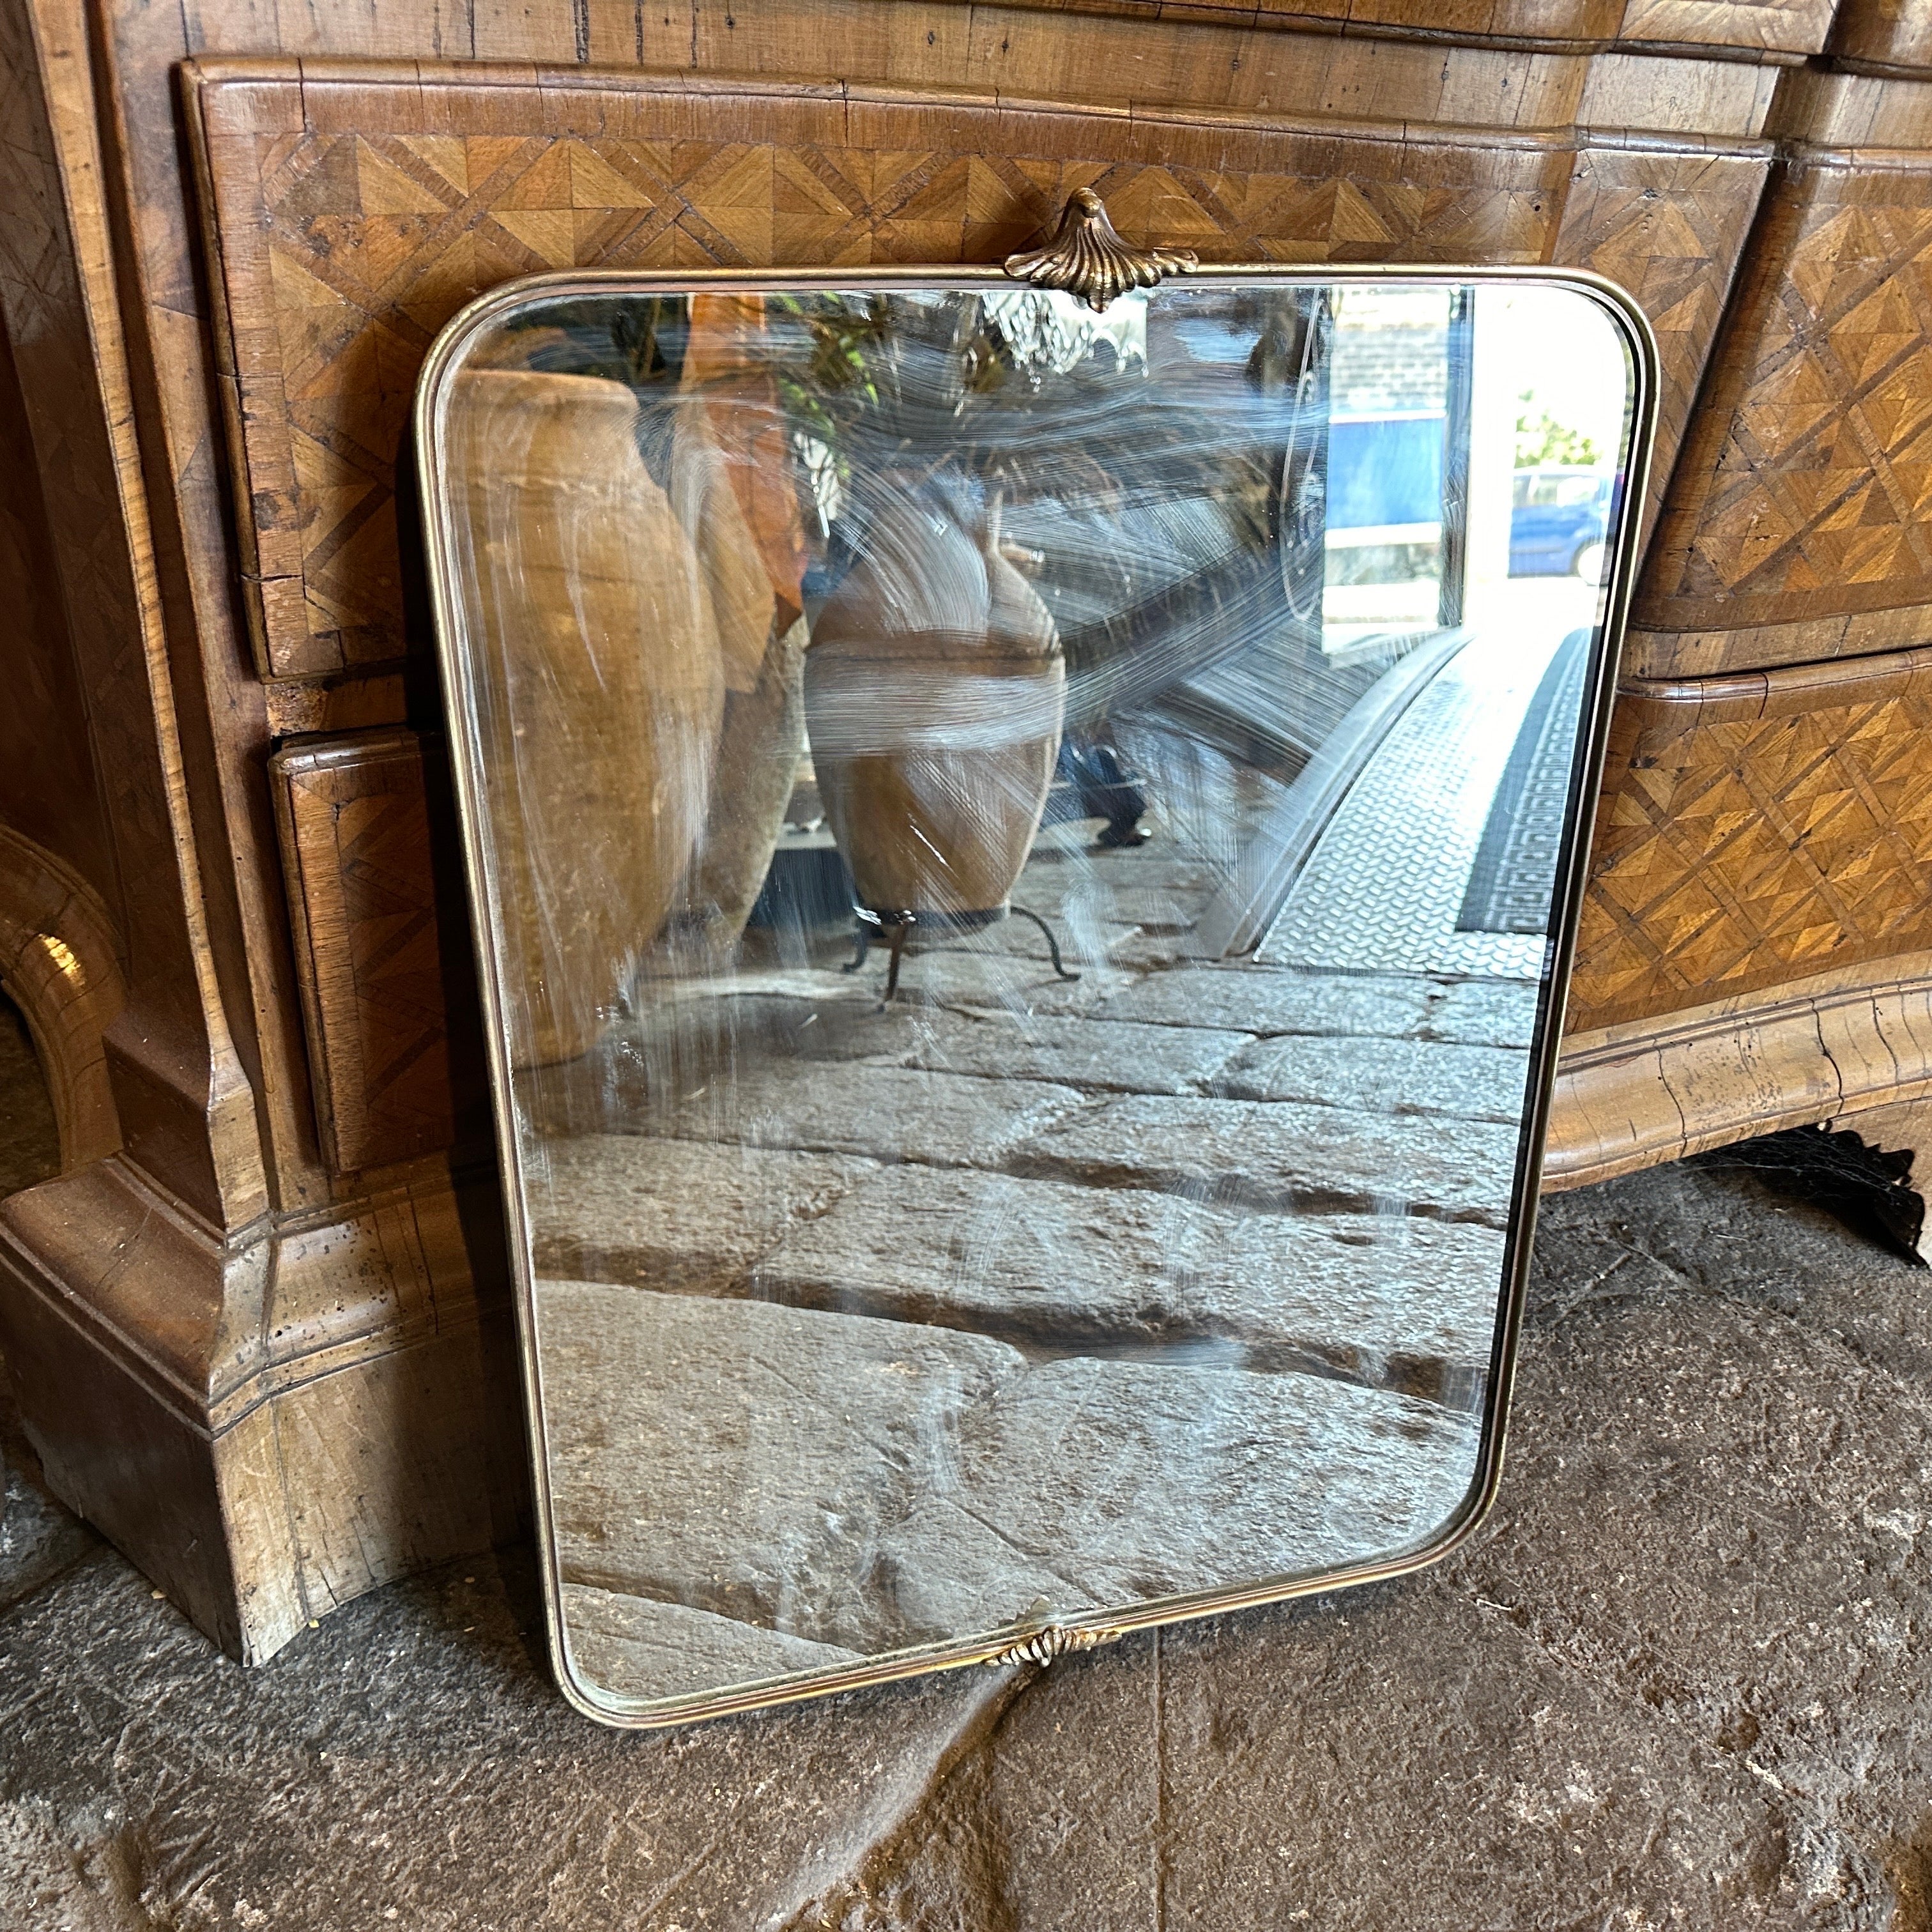 A solid brass wall mirror designed and manufactured in Italy in the manner of Gio Ponti, who used this type of mirror in the most beautiful houses in Milan in the 50s. The brass boasts a lovely original patina, while the glass remains original. The